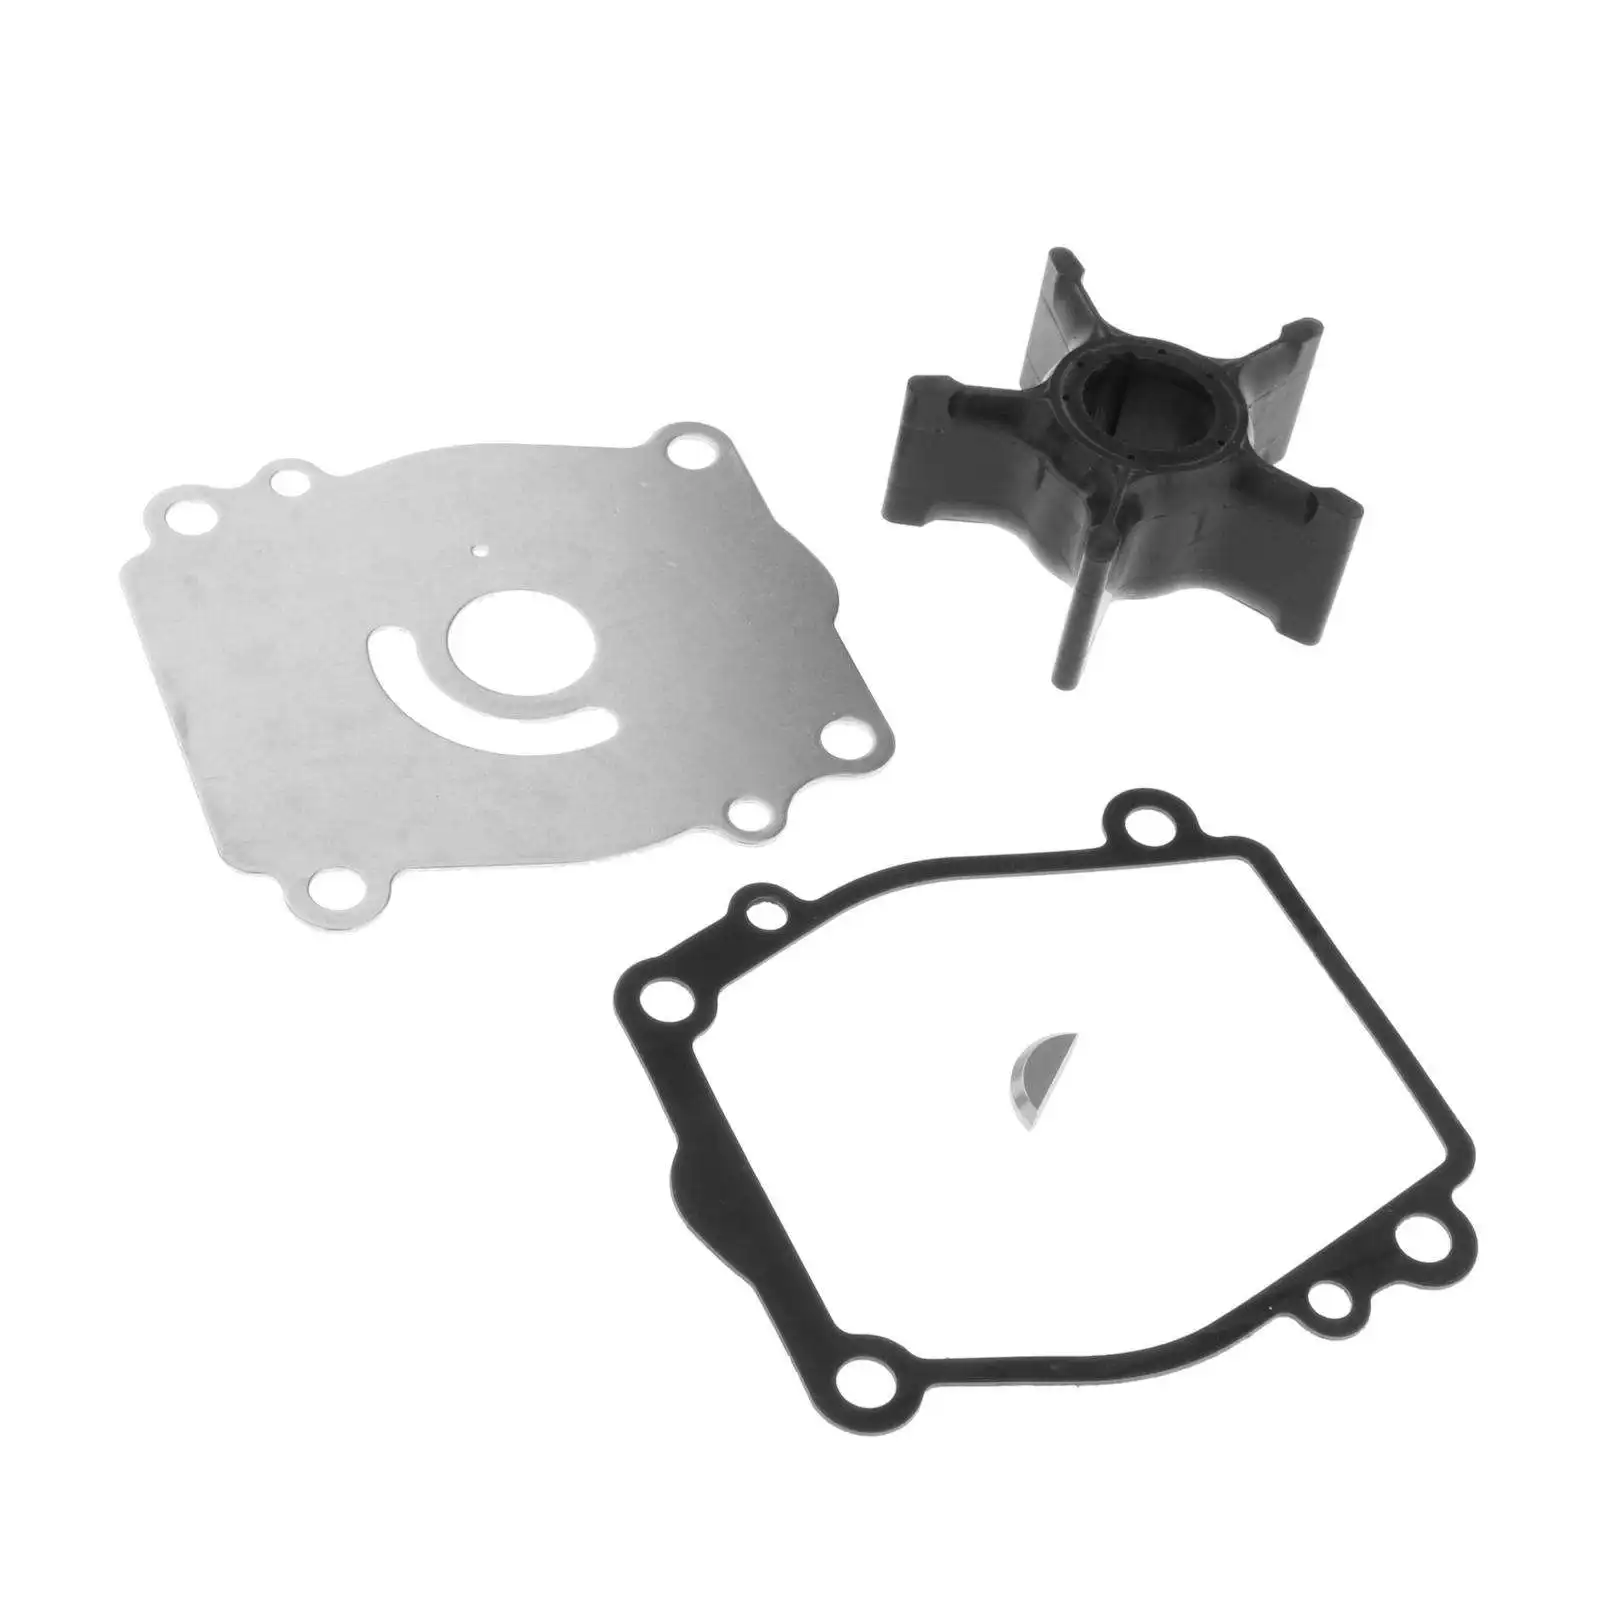 Water Pump Impeller Service Kit for Suzuki Outboard DT150-225 18-3253 17400-87D11 Model Replace Parts Acc 1 Set